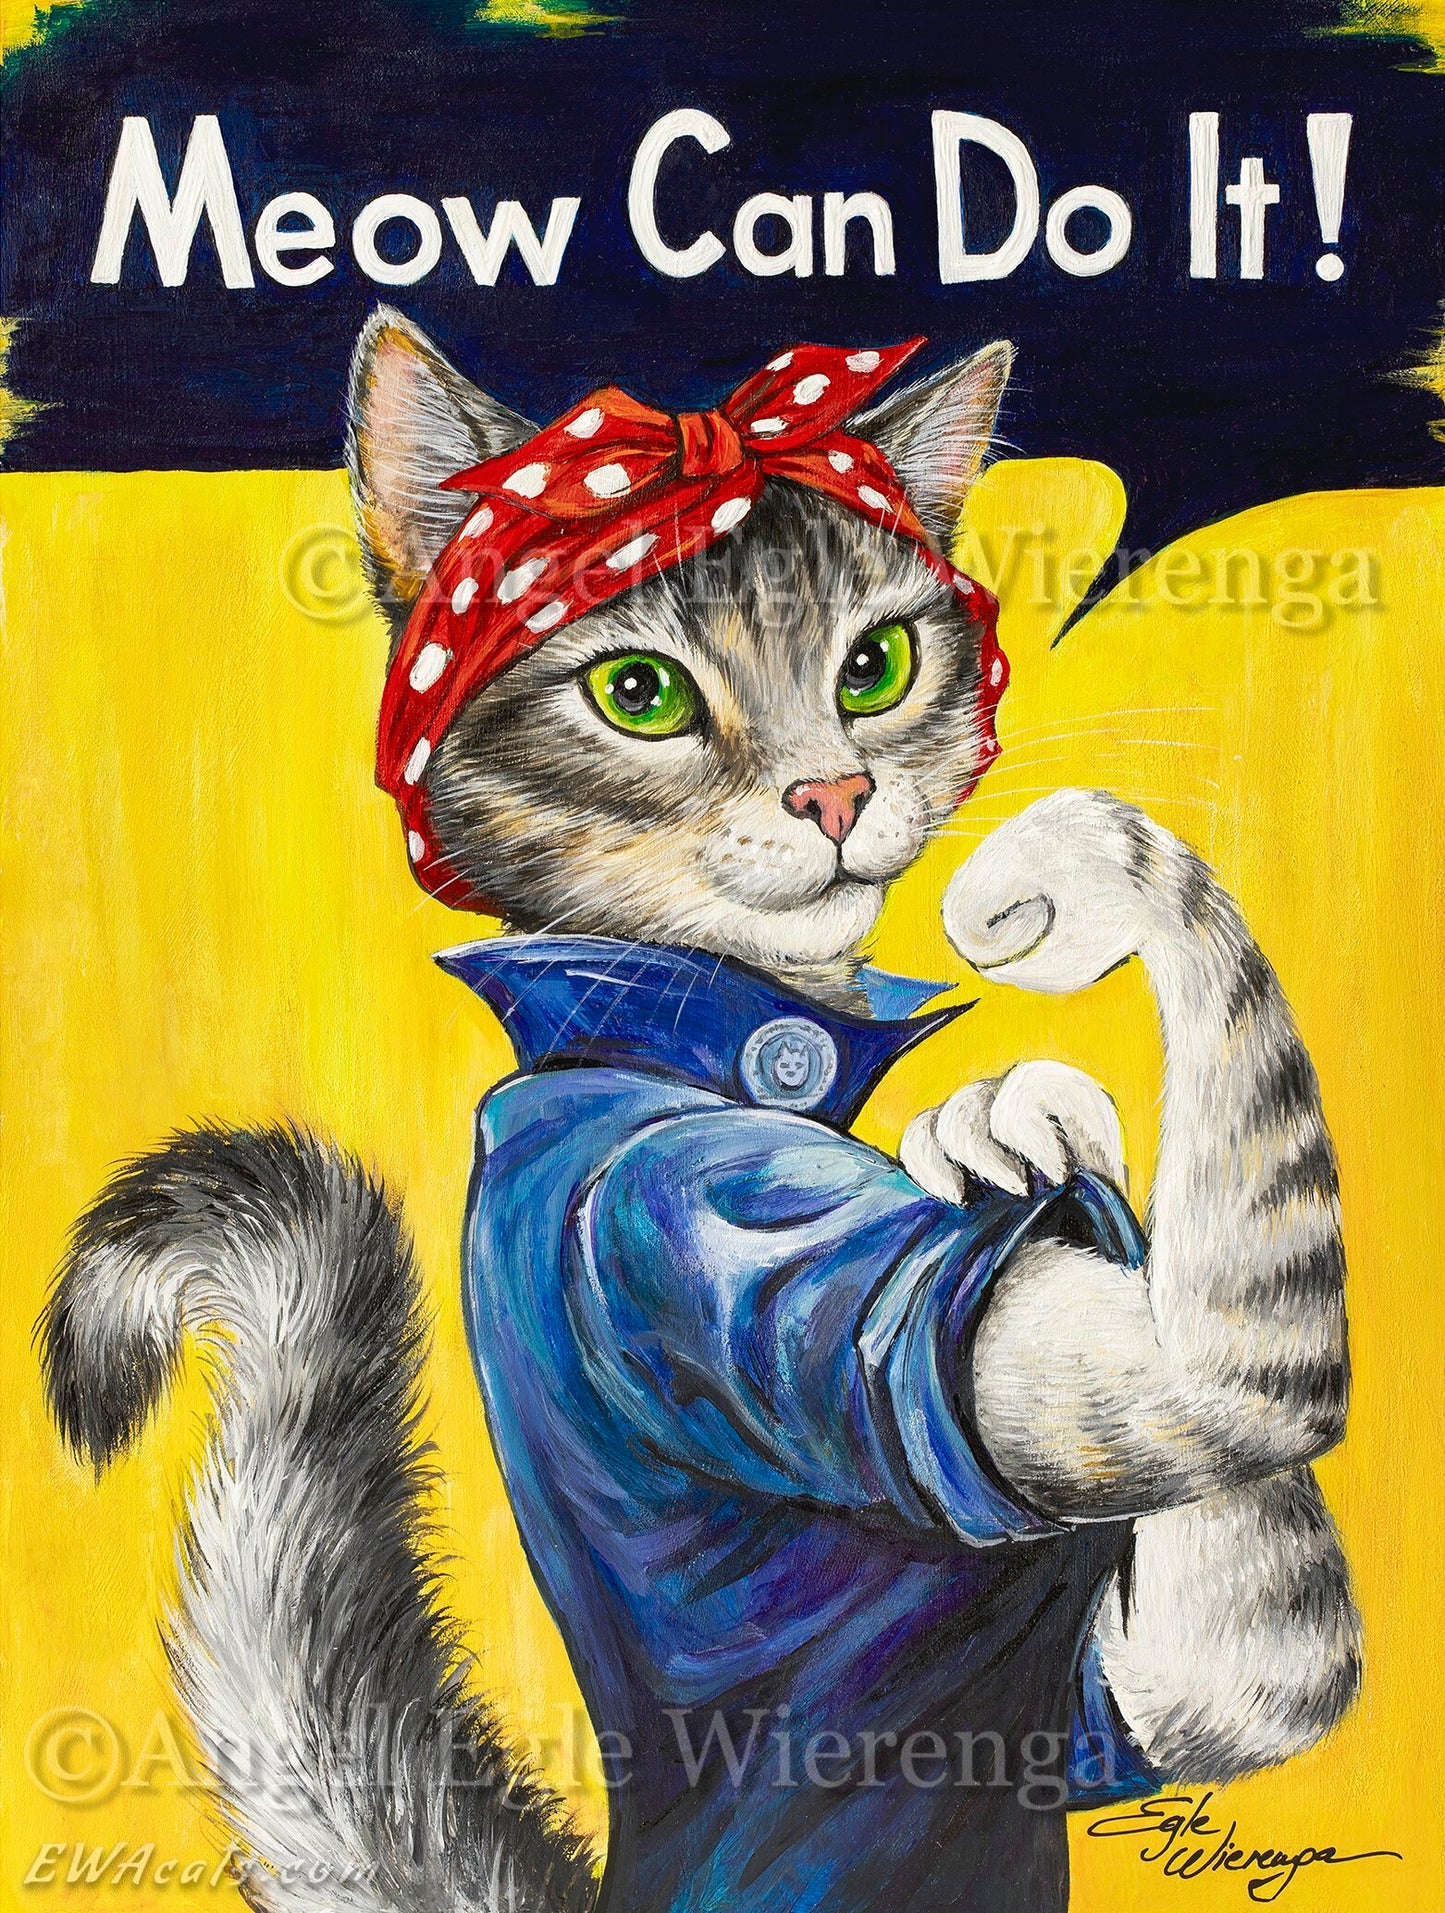 CANVAS "Meow Can Do It!" Open & Limited Edition